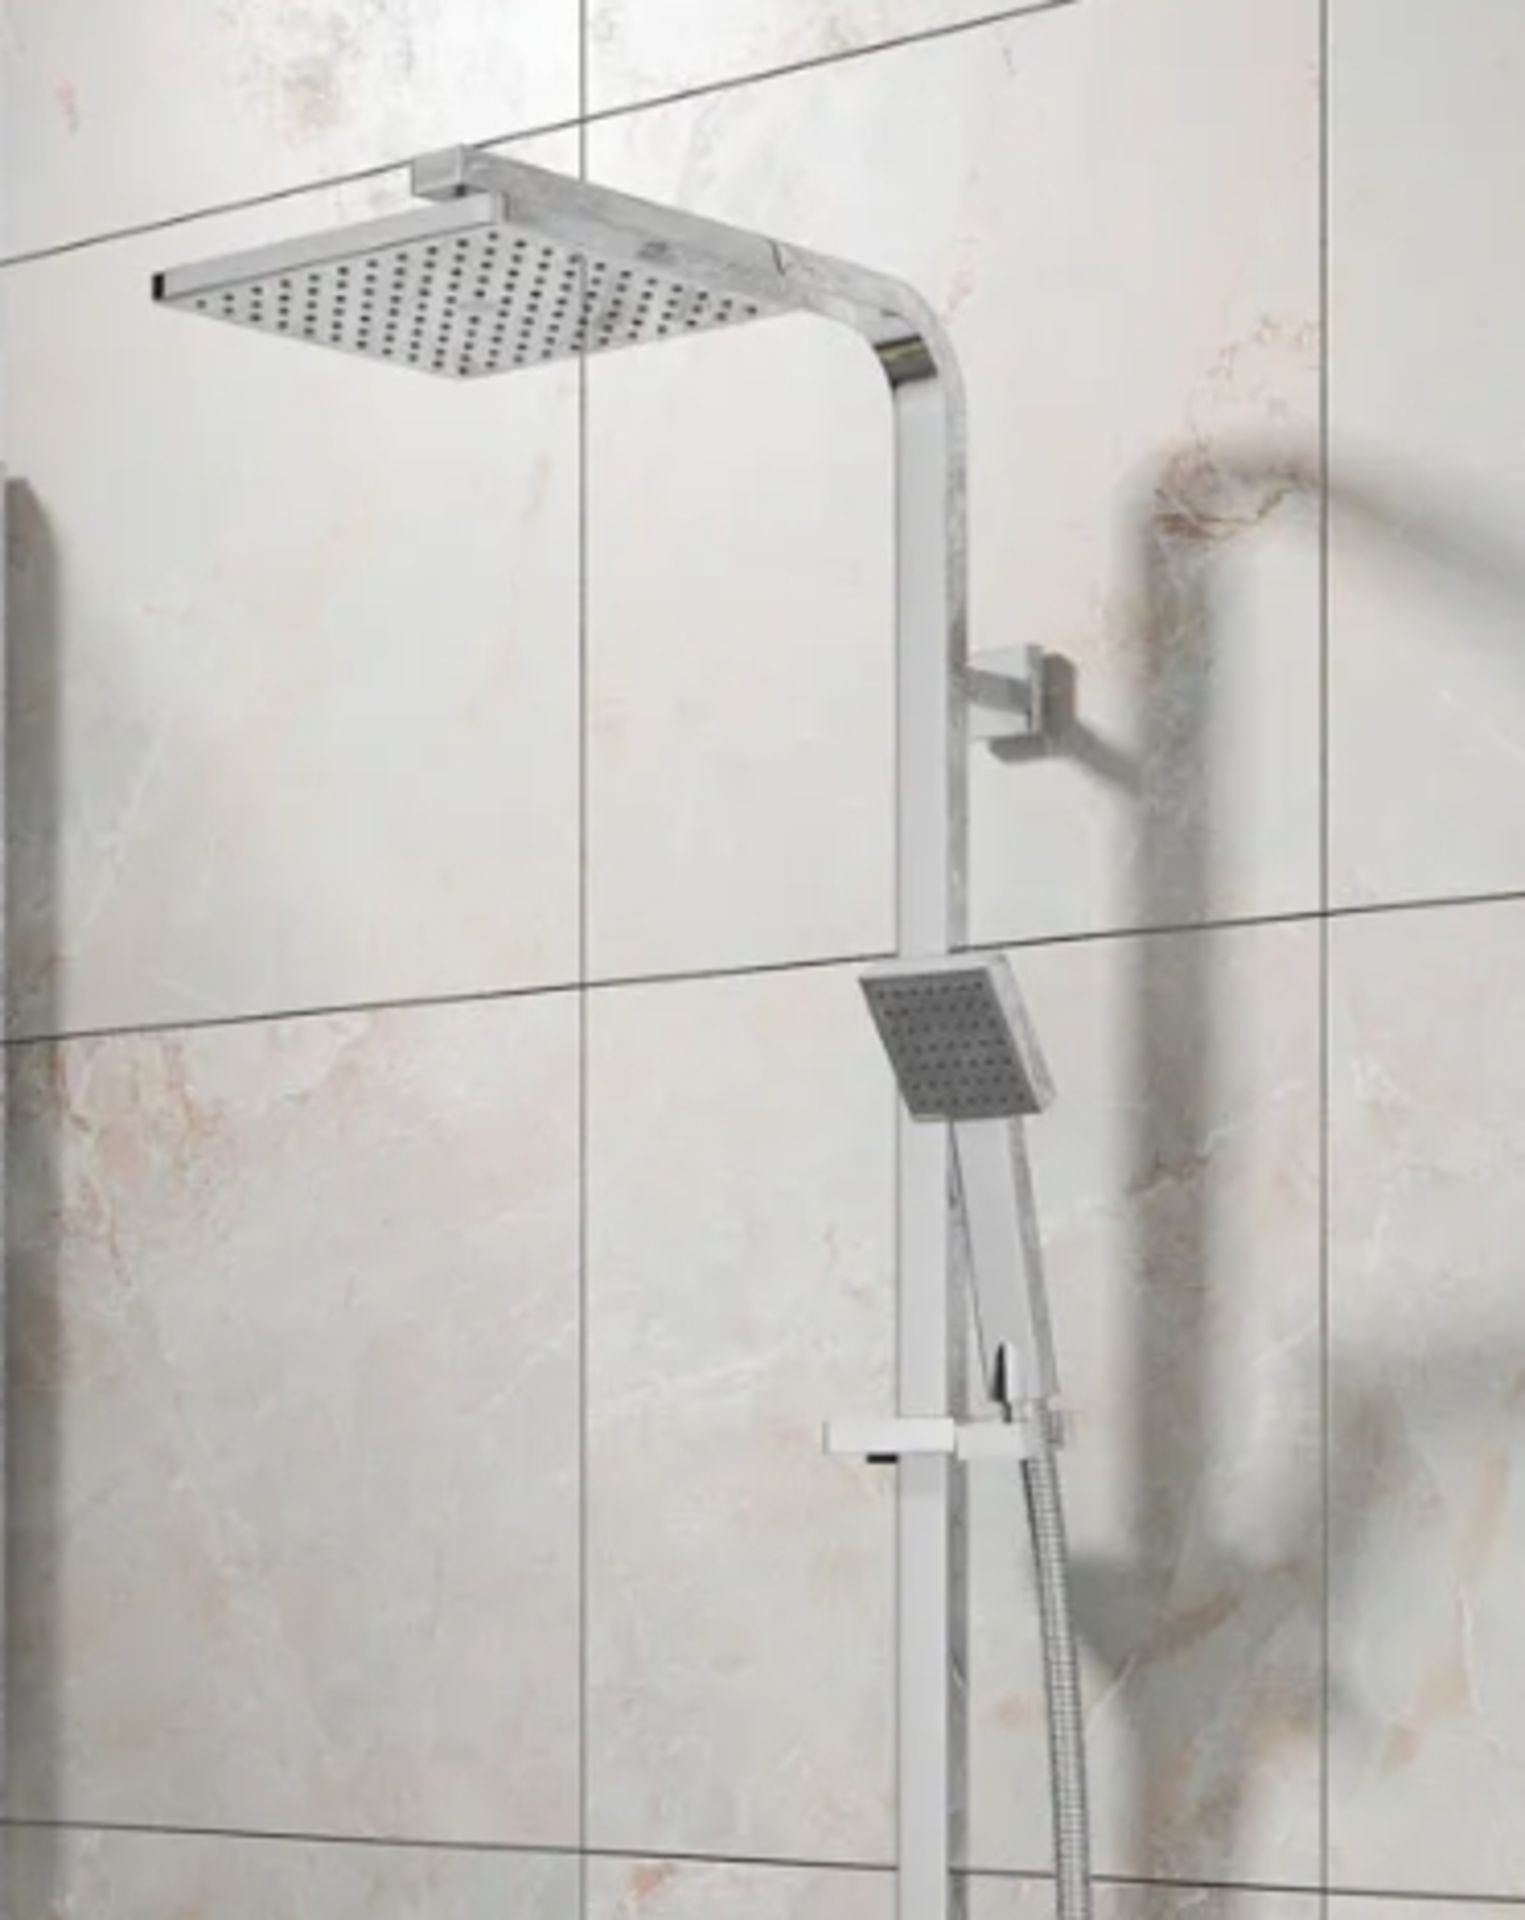 1 x Arley Biscay Chrome Thermostatic Shower Kit With Square Bar Valve - New Boxed Stock - RRP £238 - Image 3 of 3